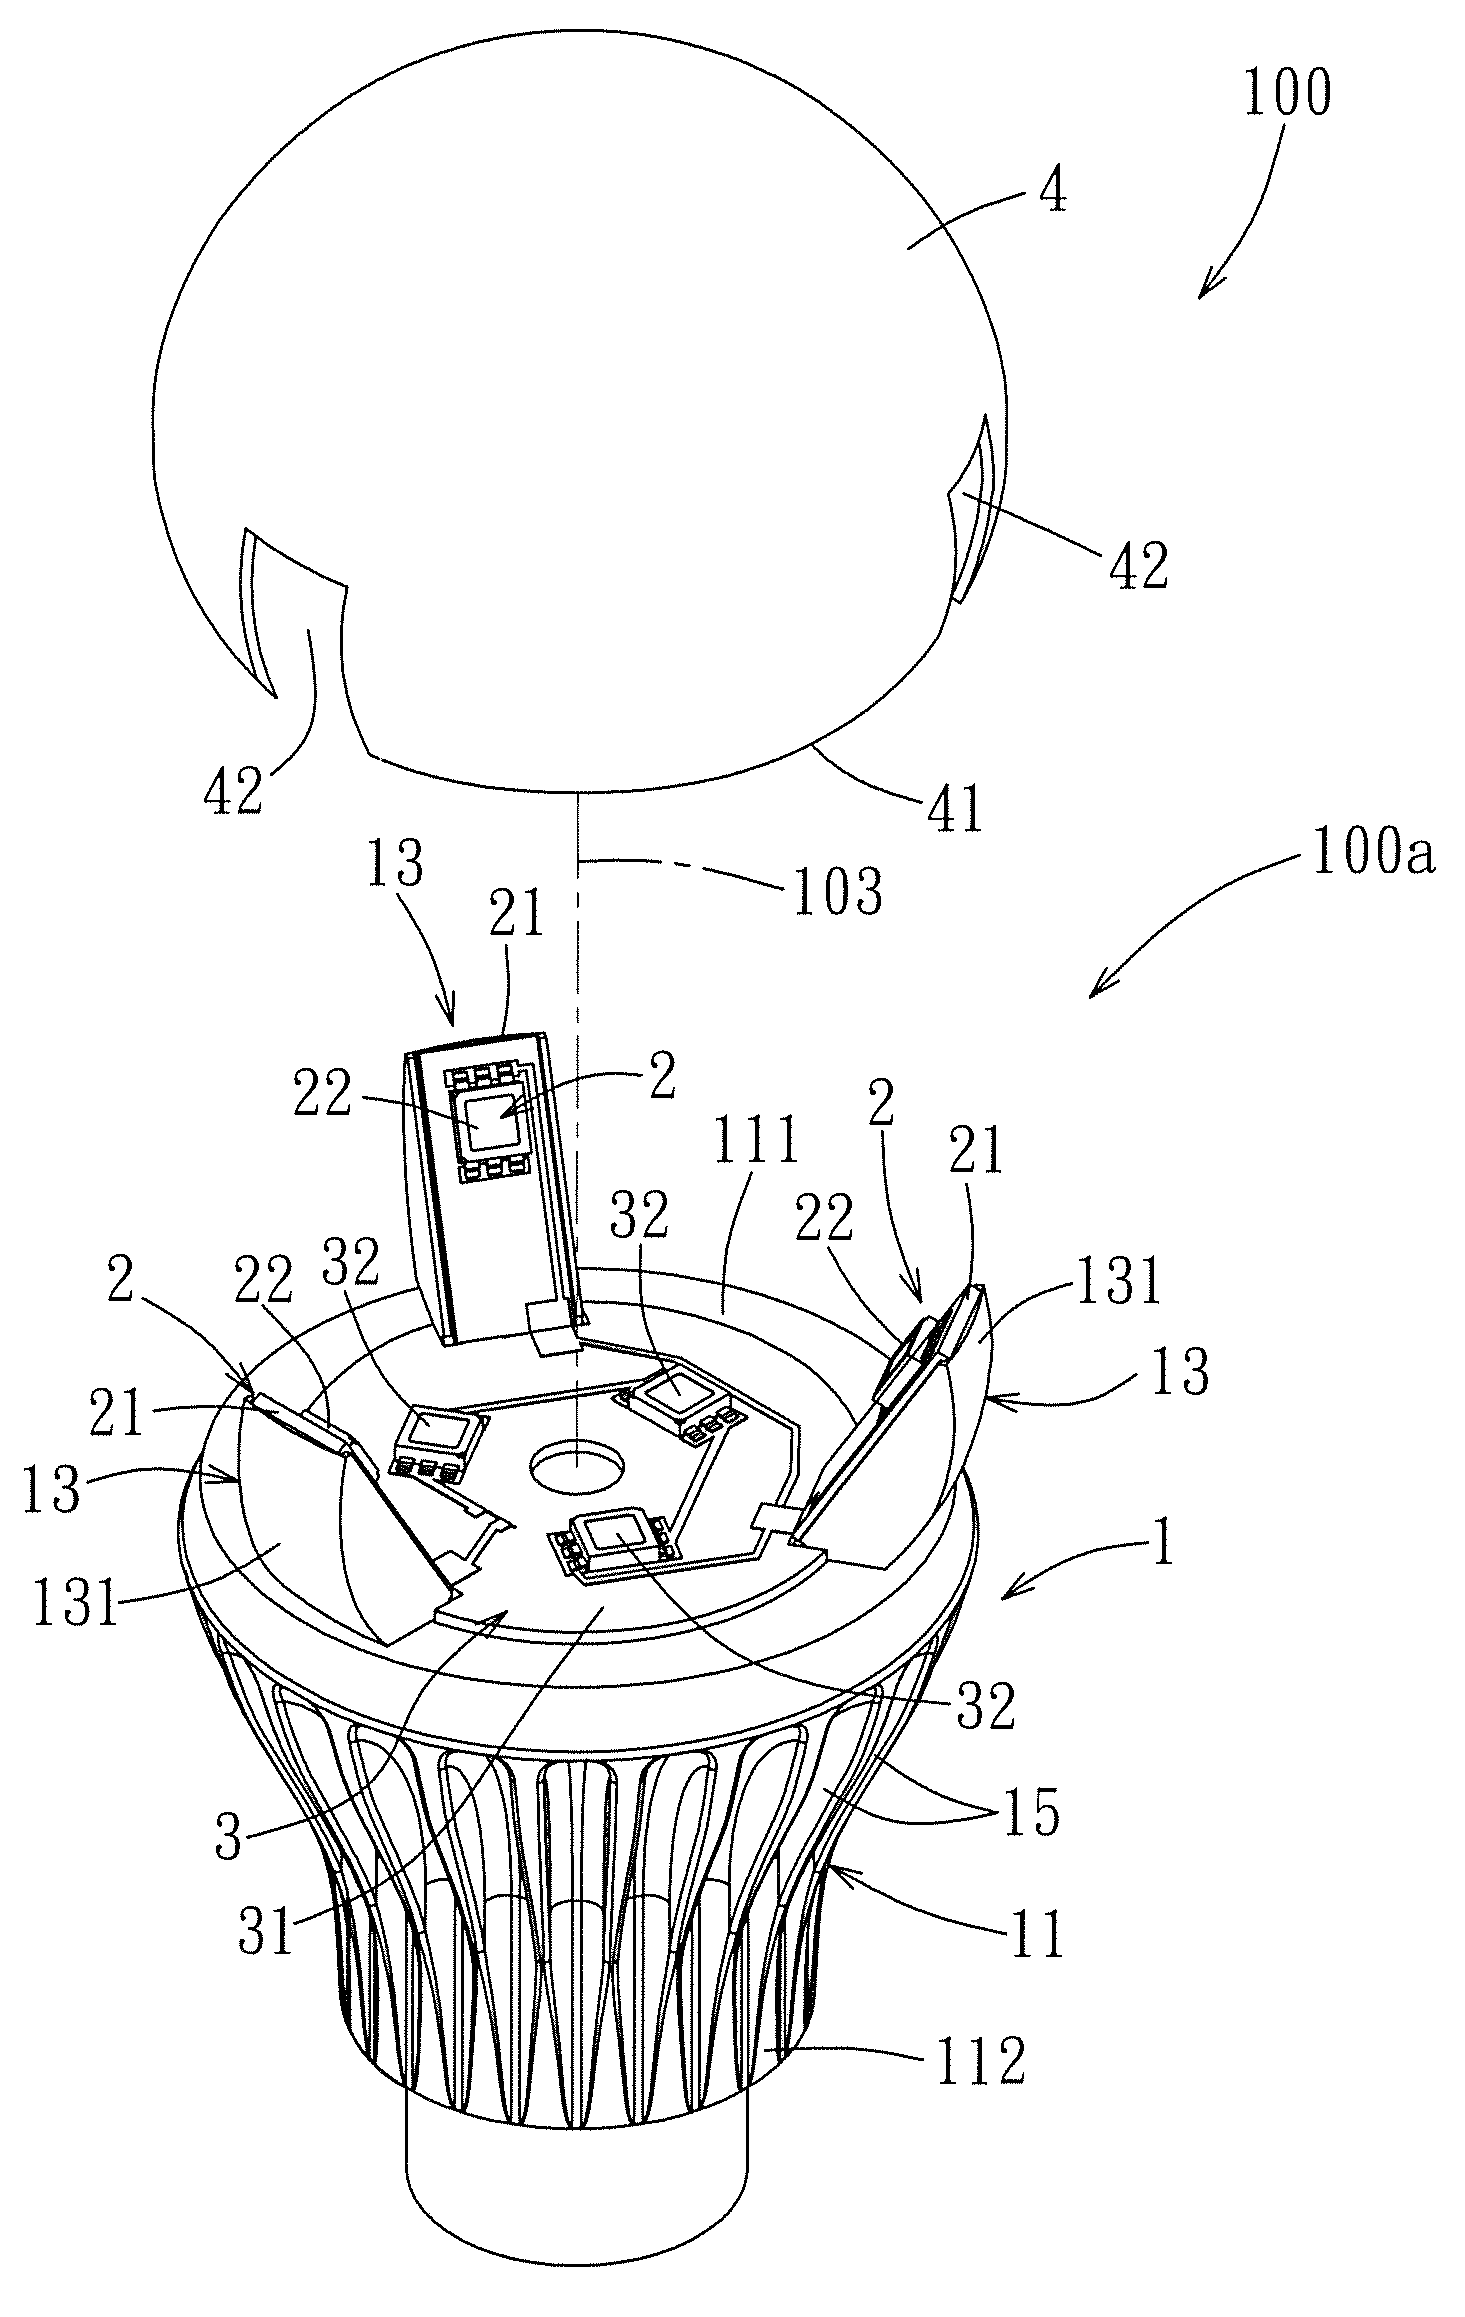 Luminaire having light-emitting elements disposed on protrusions